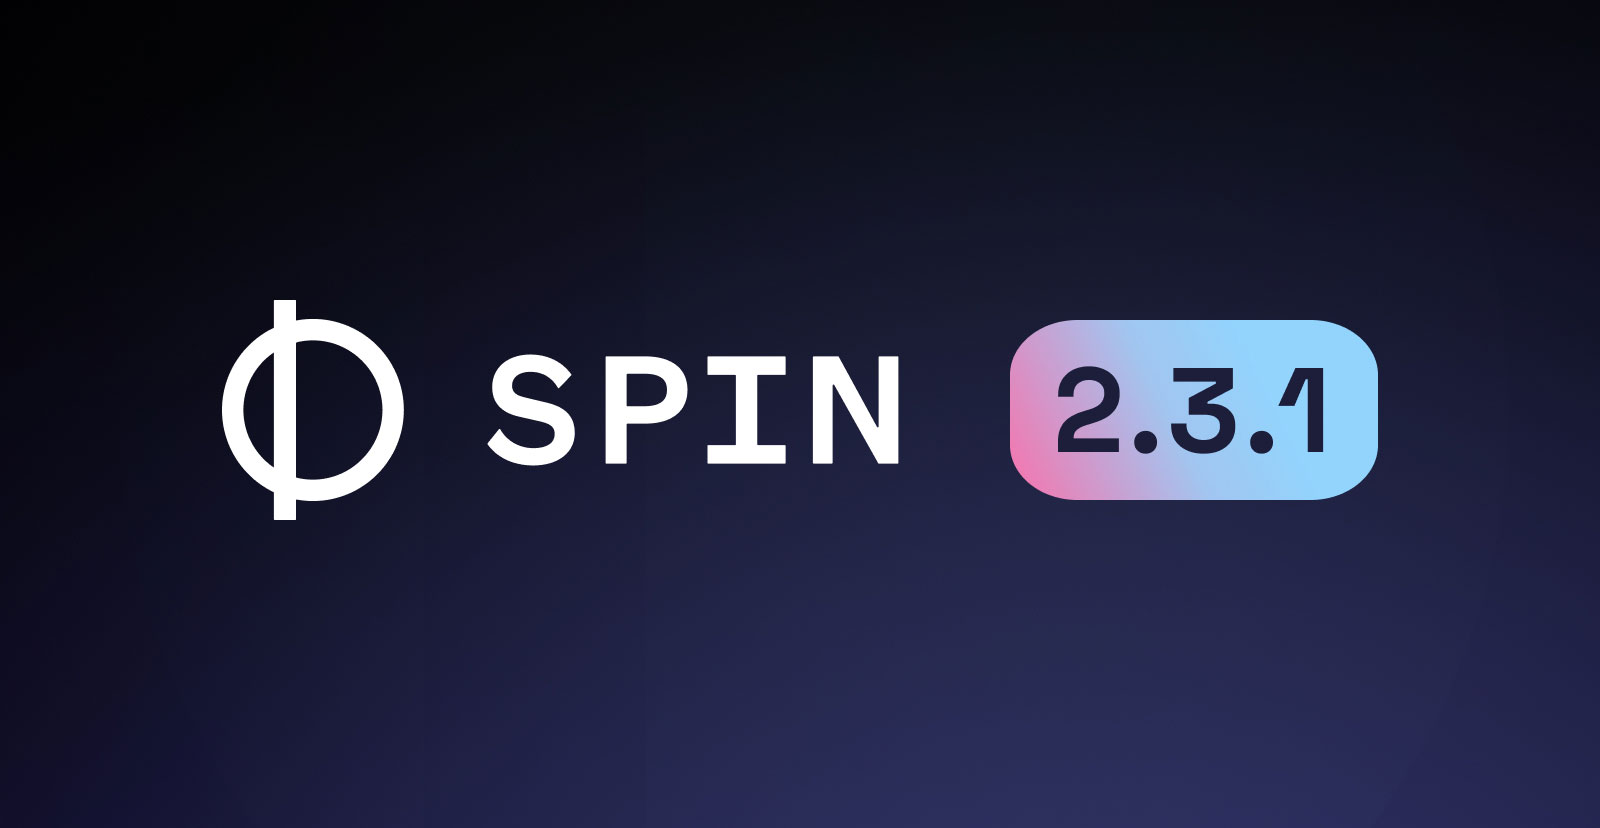 Announcing Spin 2.3.1